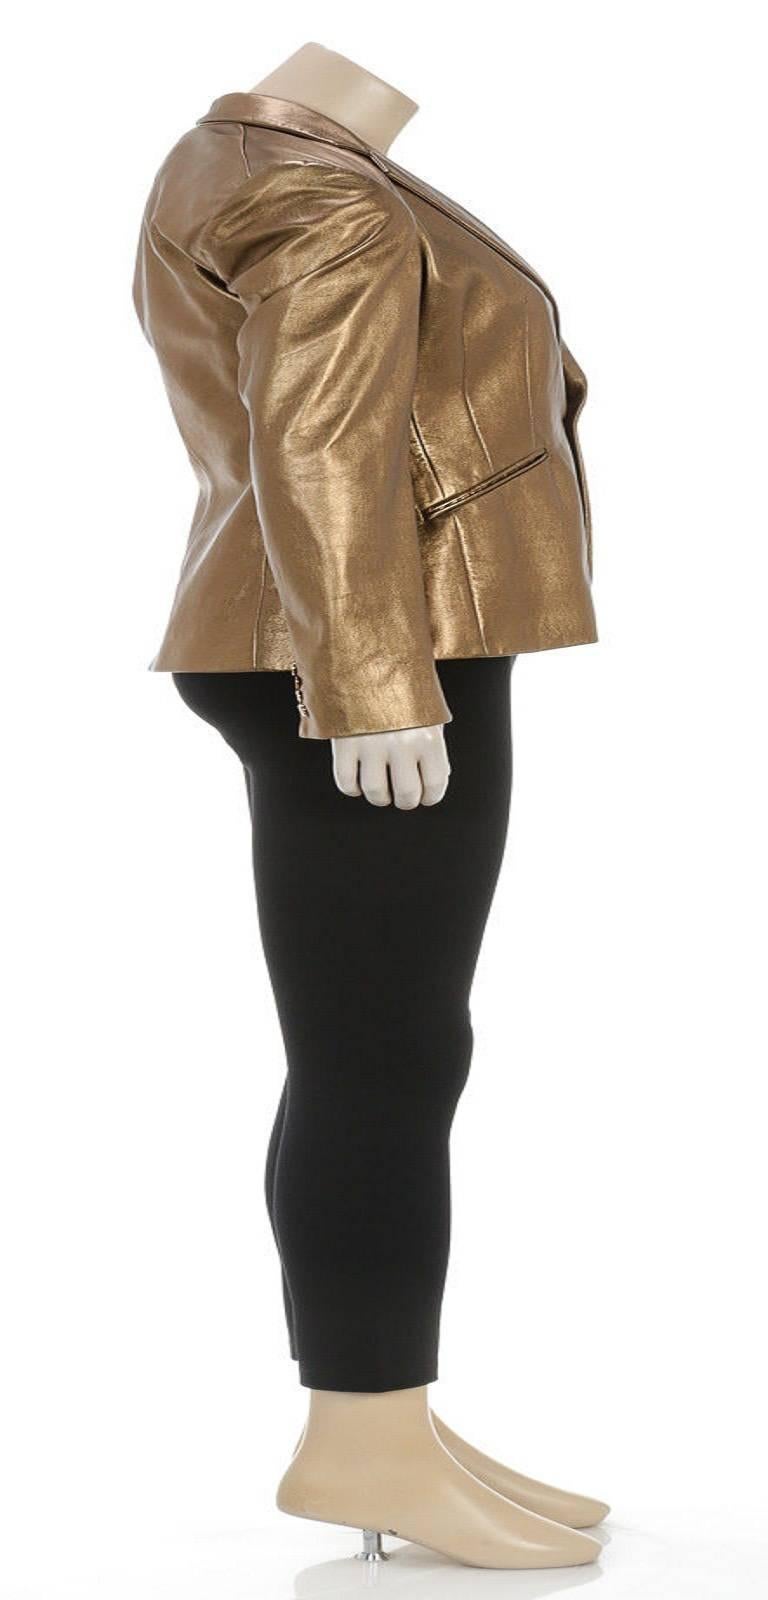 Ralph Lauren Gold Leather One Button Jacket (Size 4) NEW In Good Condition For Sale In Corona Del Mar, CA